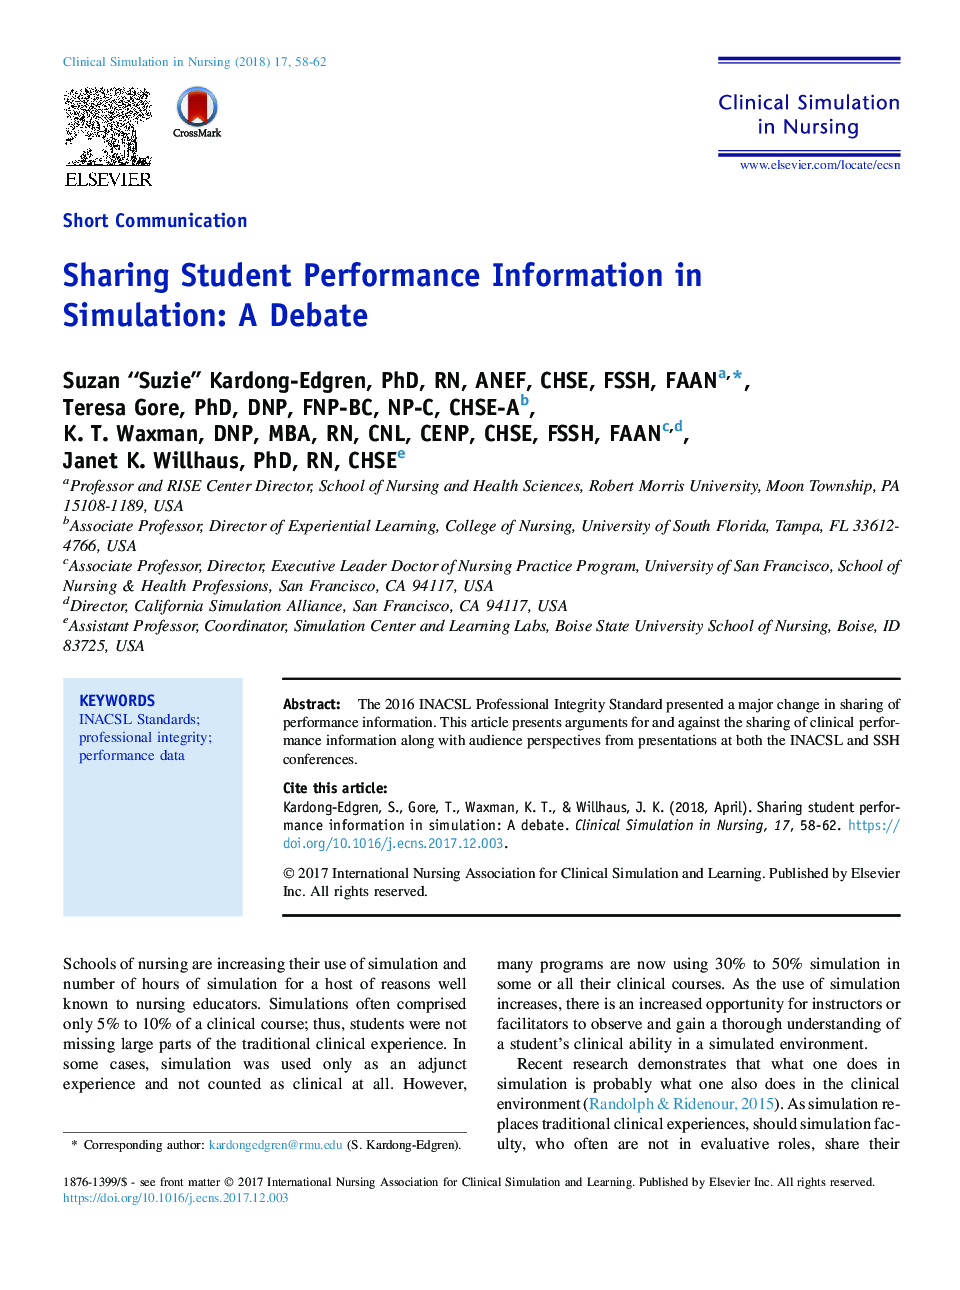 Sharing Student Performance Information in Simulation: A Debate